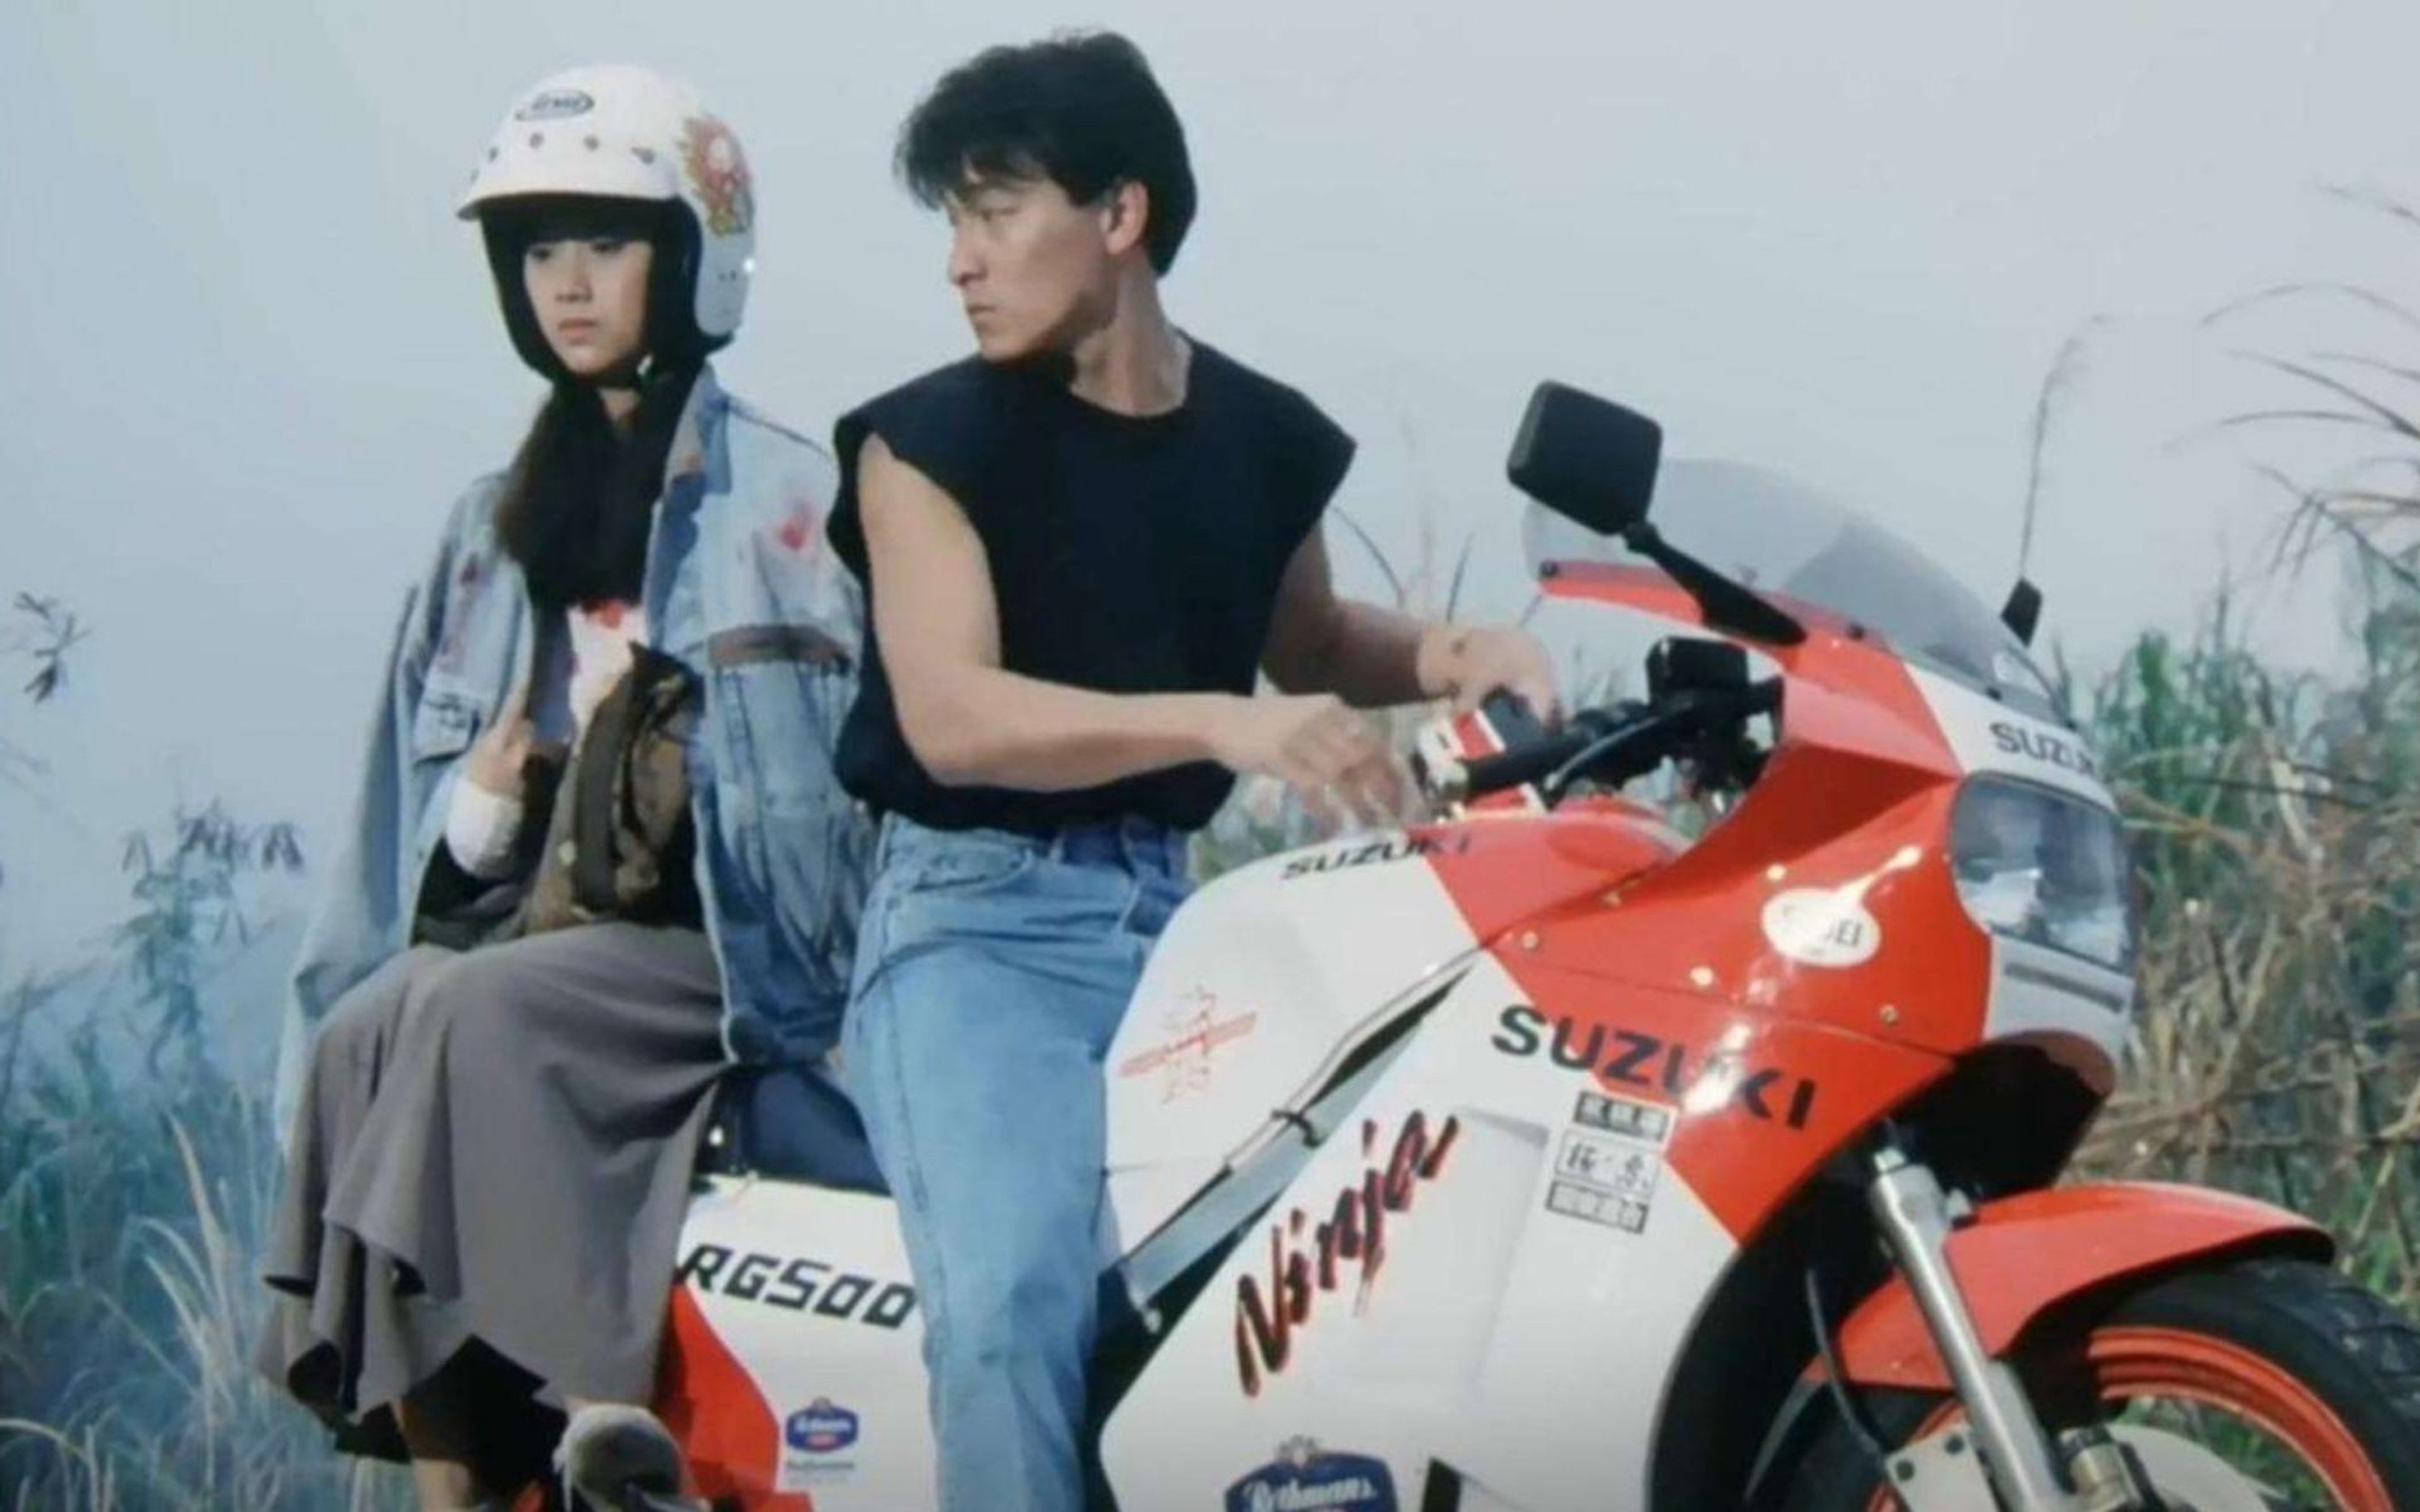 Wu Chien-lien and Andy Lau in a still from A Moment of Romance (1990), directed by Benny Chan.